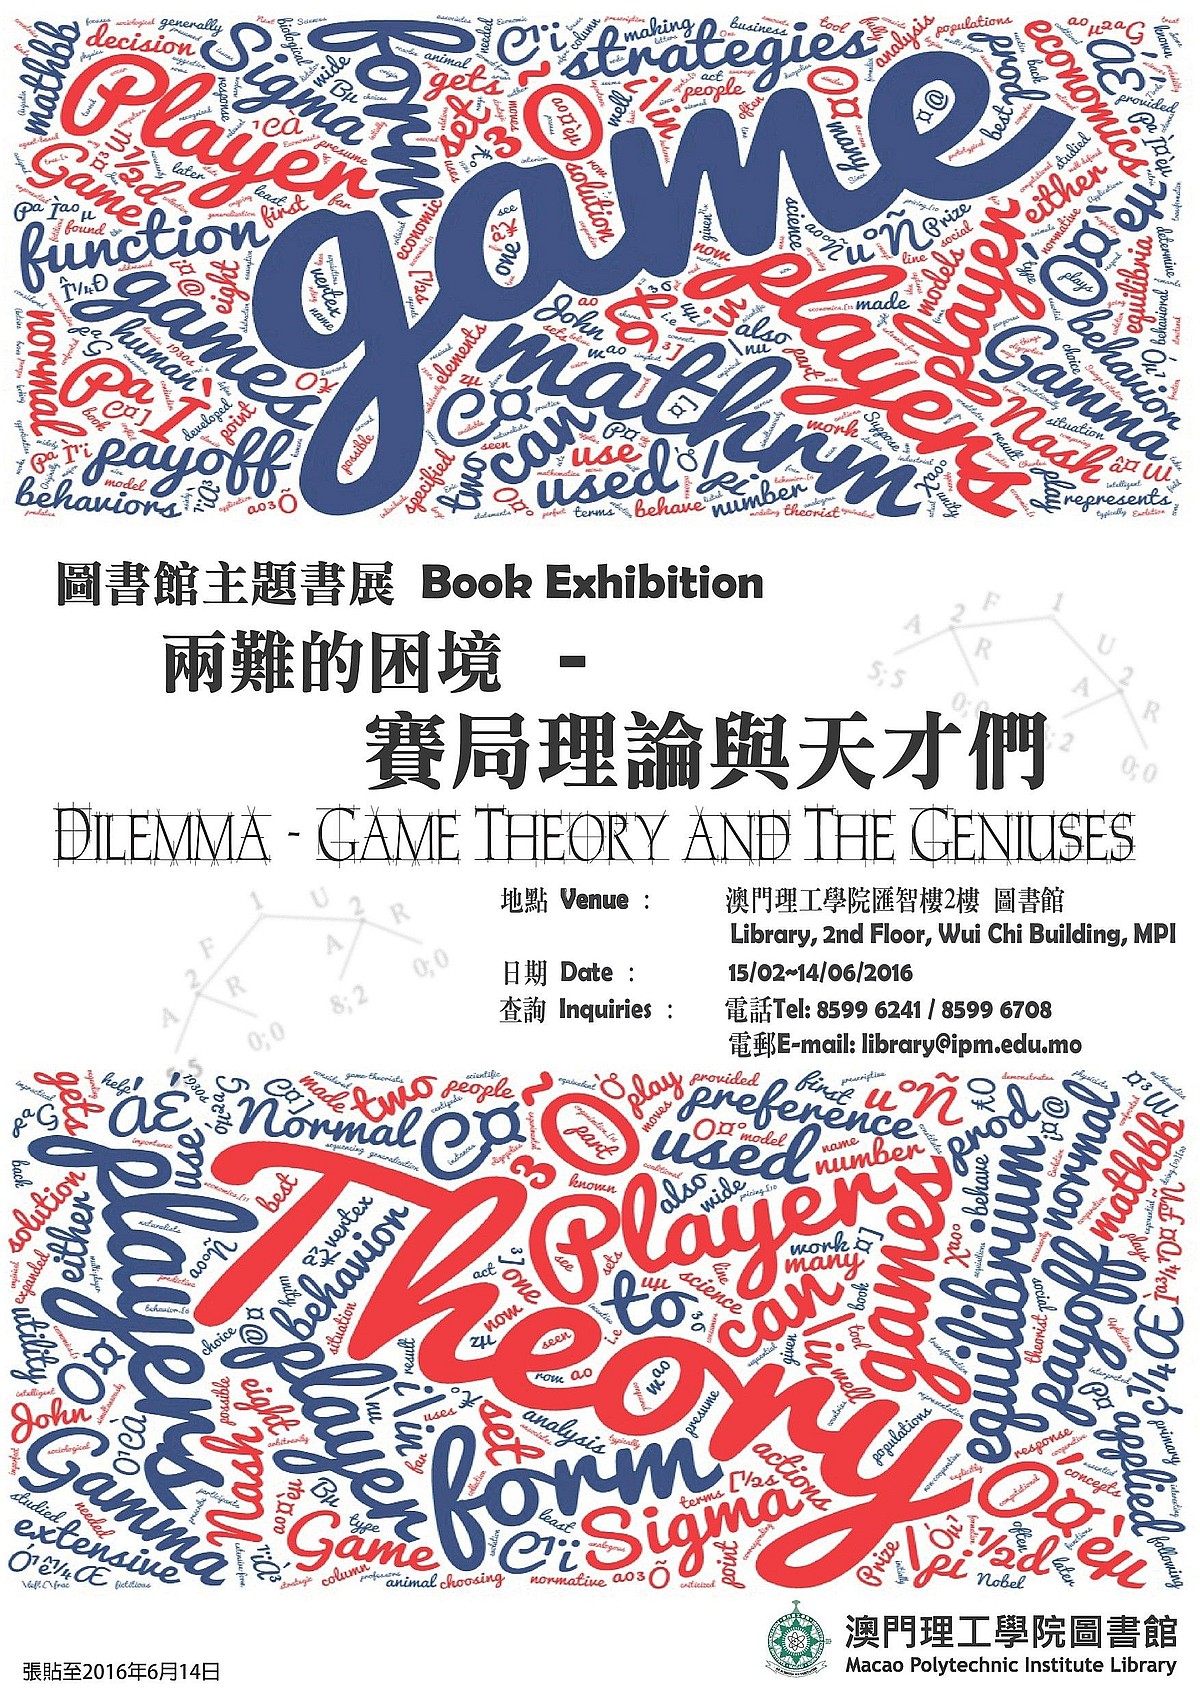 LIBRARY BOOK EXHIBITION 1 - Dilemma - Game Theory and Geniuses